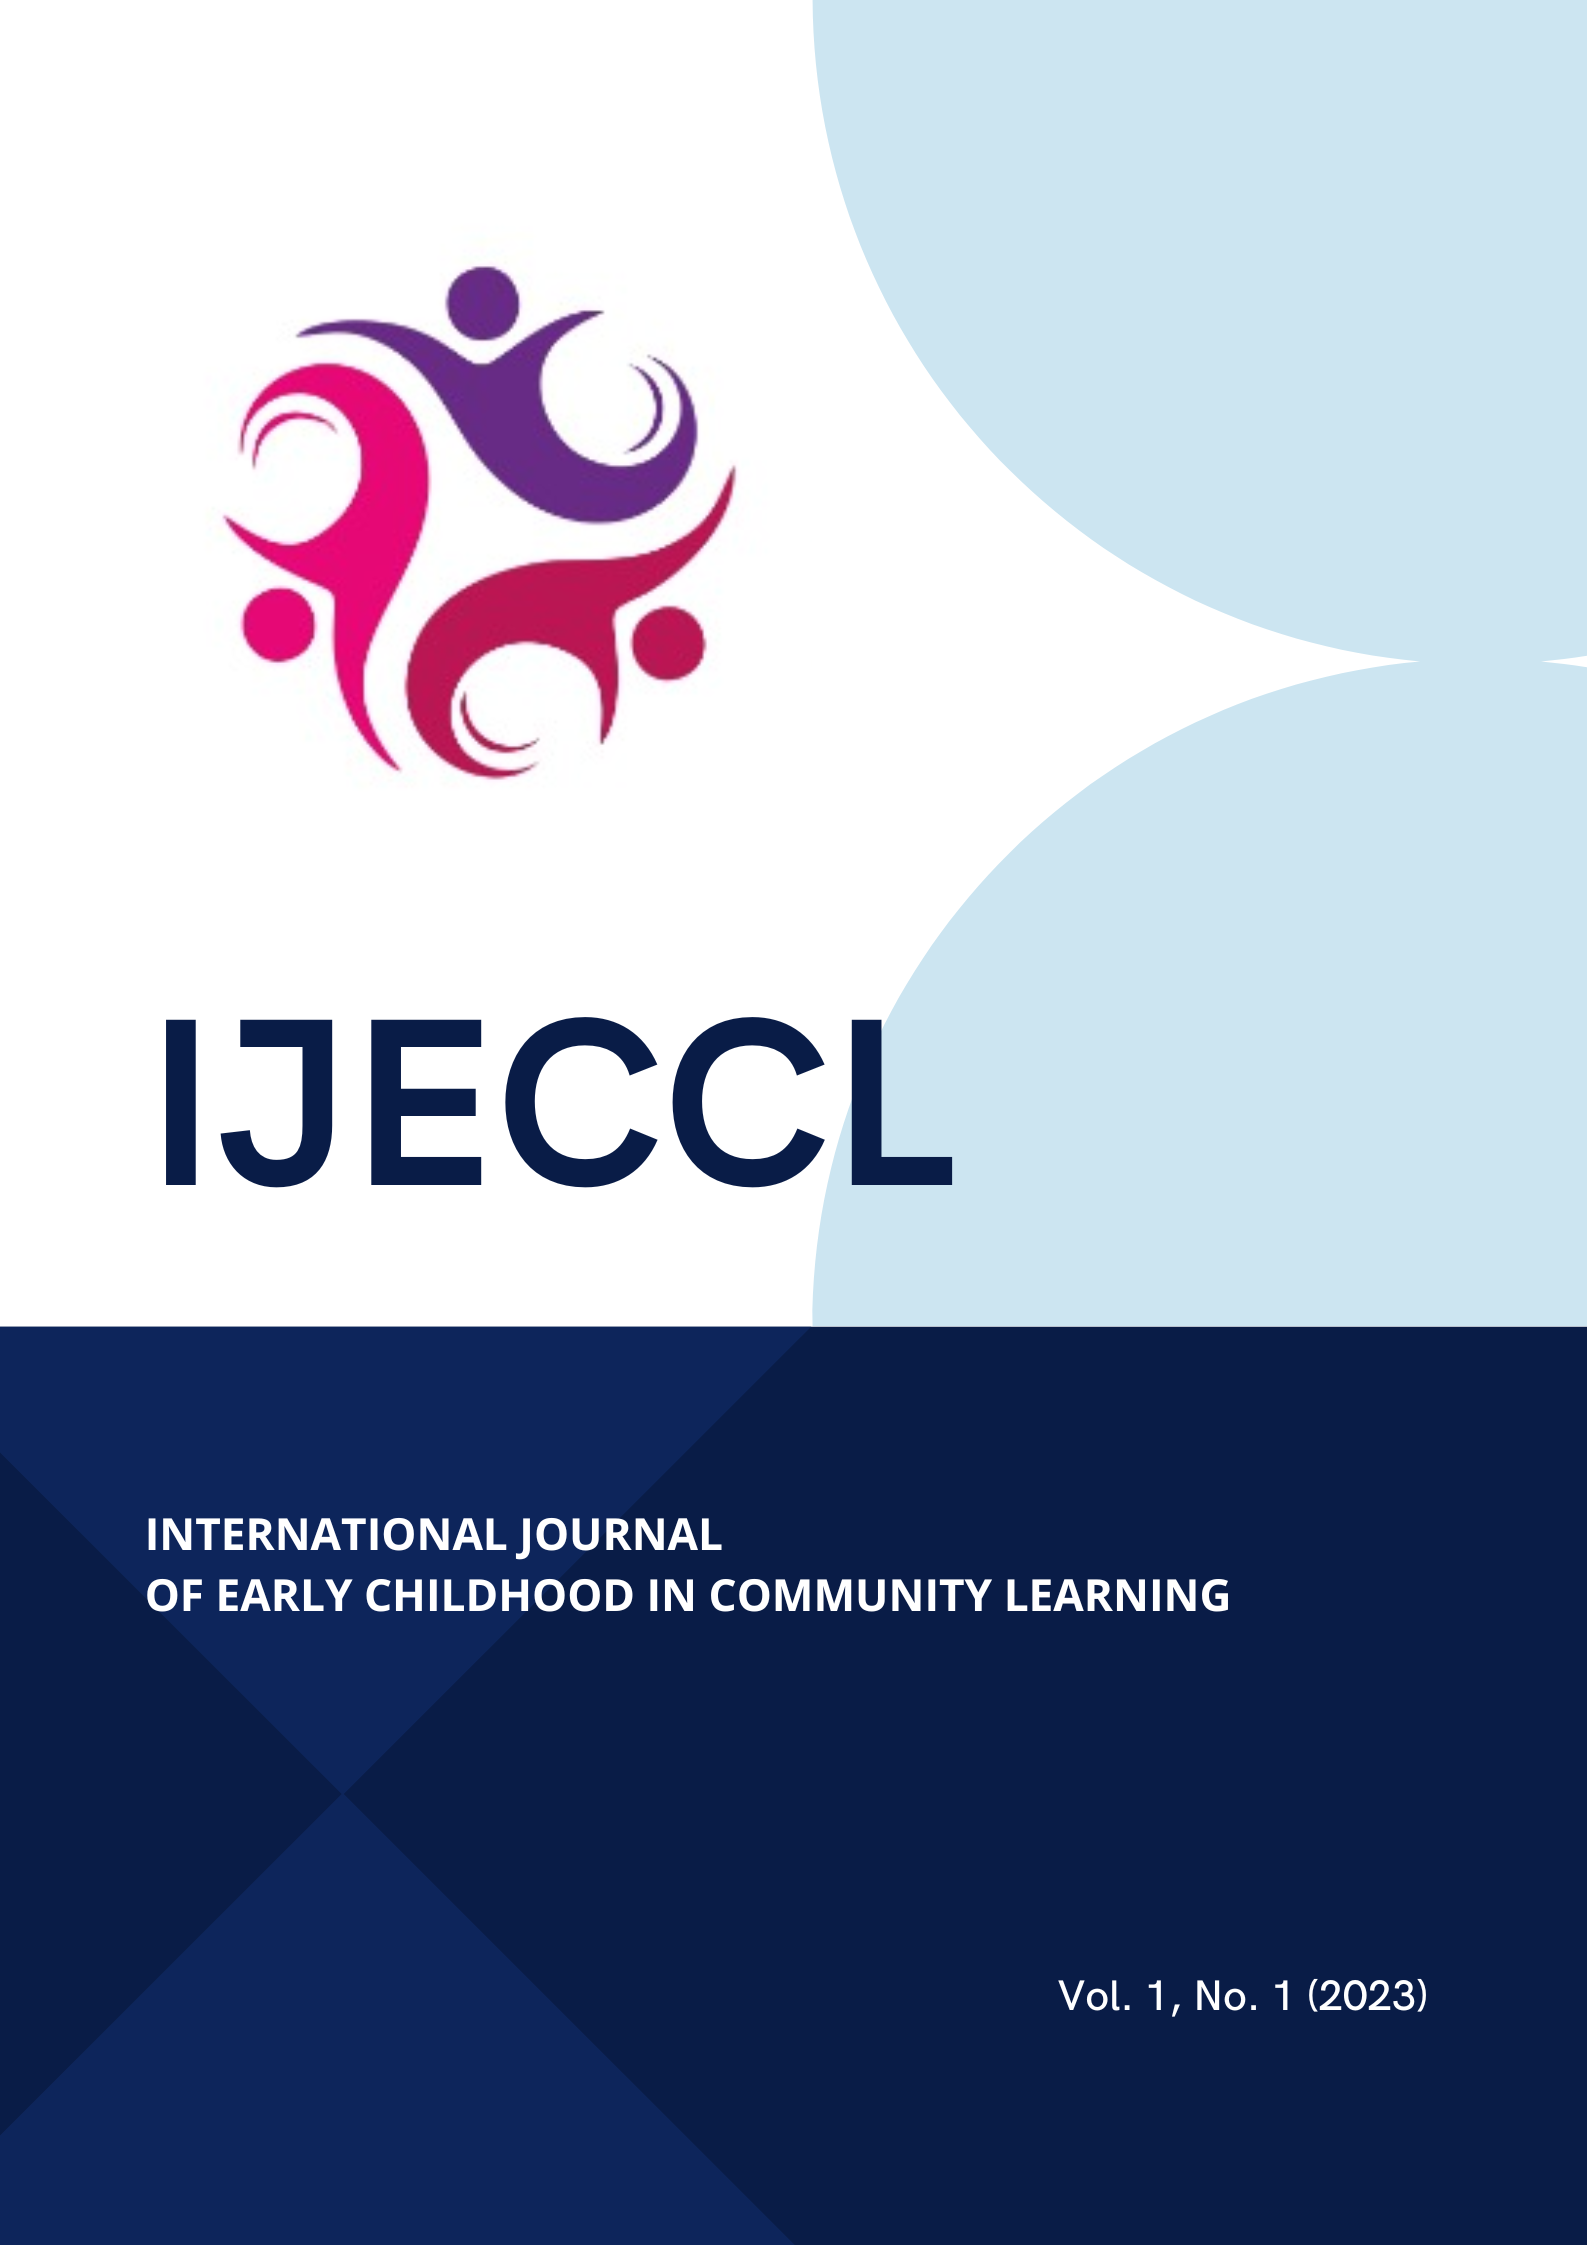 					View Vol. 1 No. 1 (2023): International Journal of Early Childhood Community Learning 
				